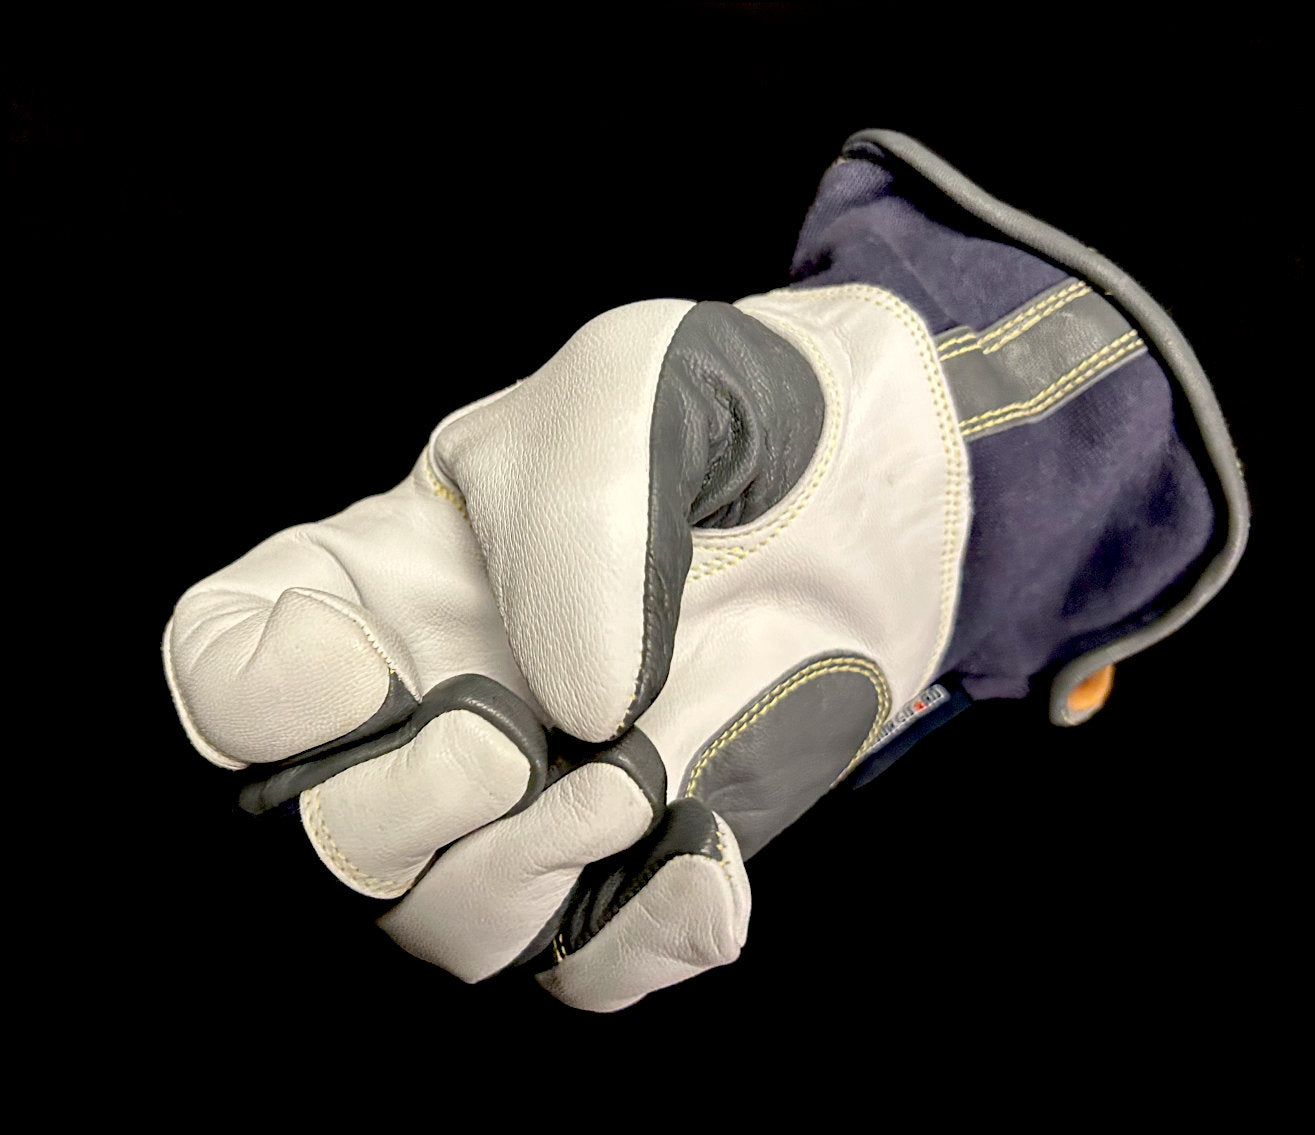 white and blue TIG glove perfectly fit on a hand